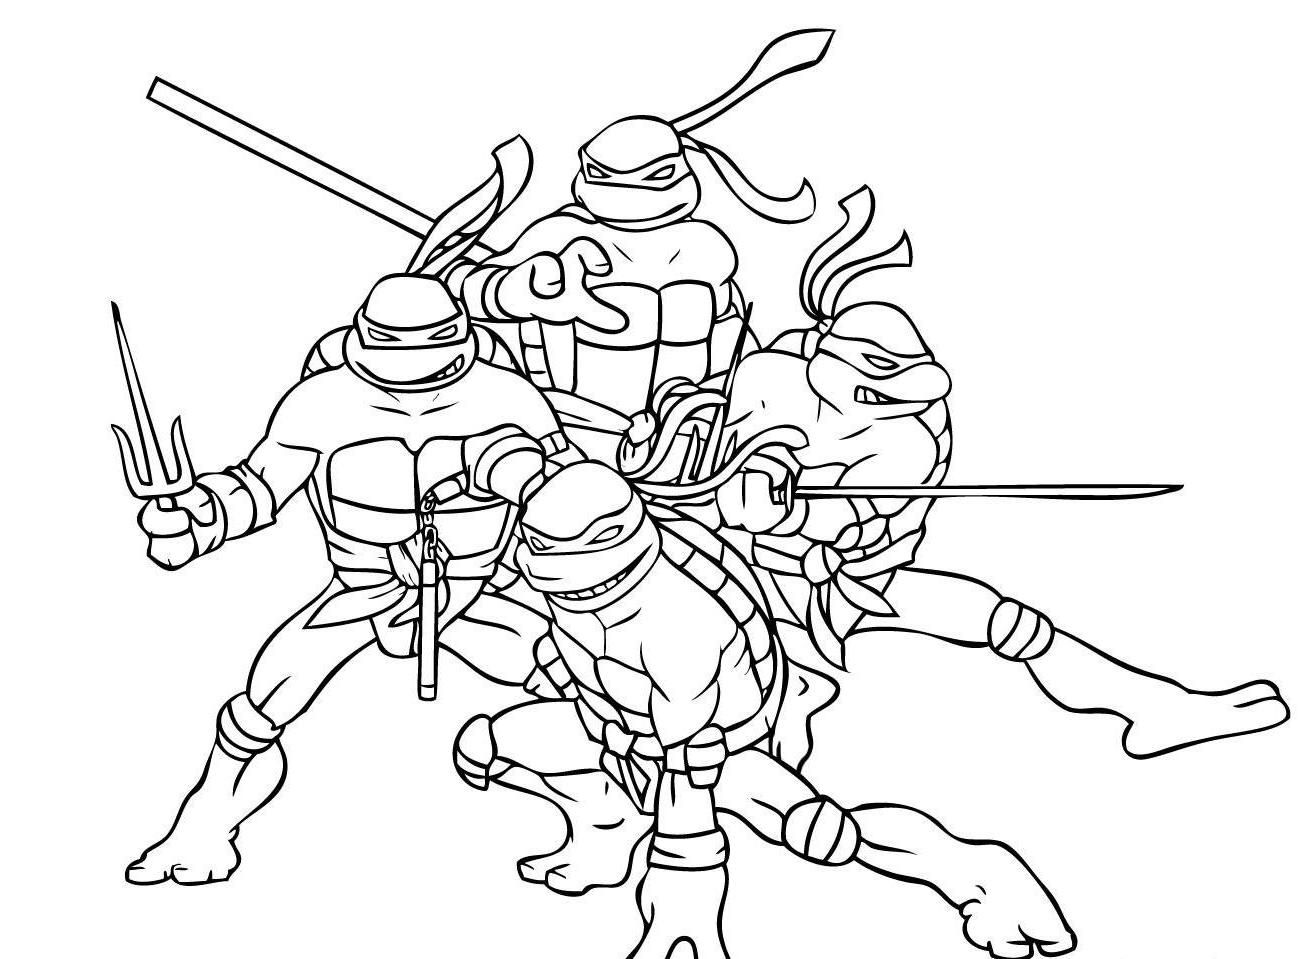 The Ninja Turtles Coloring Pages 80s Cartoons Colouring Pages!! Pinterest  Ninja turtles - jeffersonclan